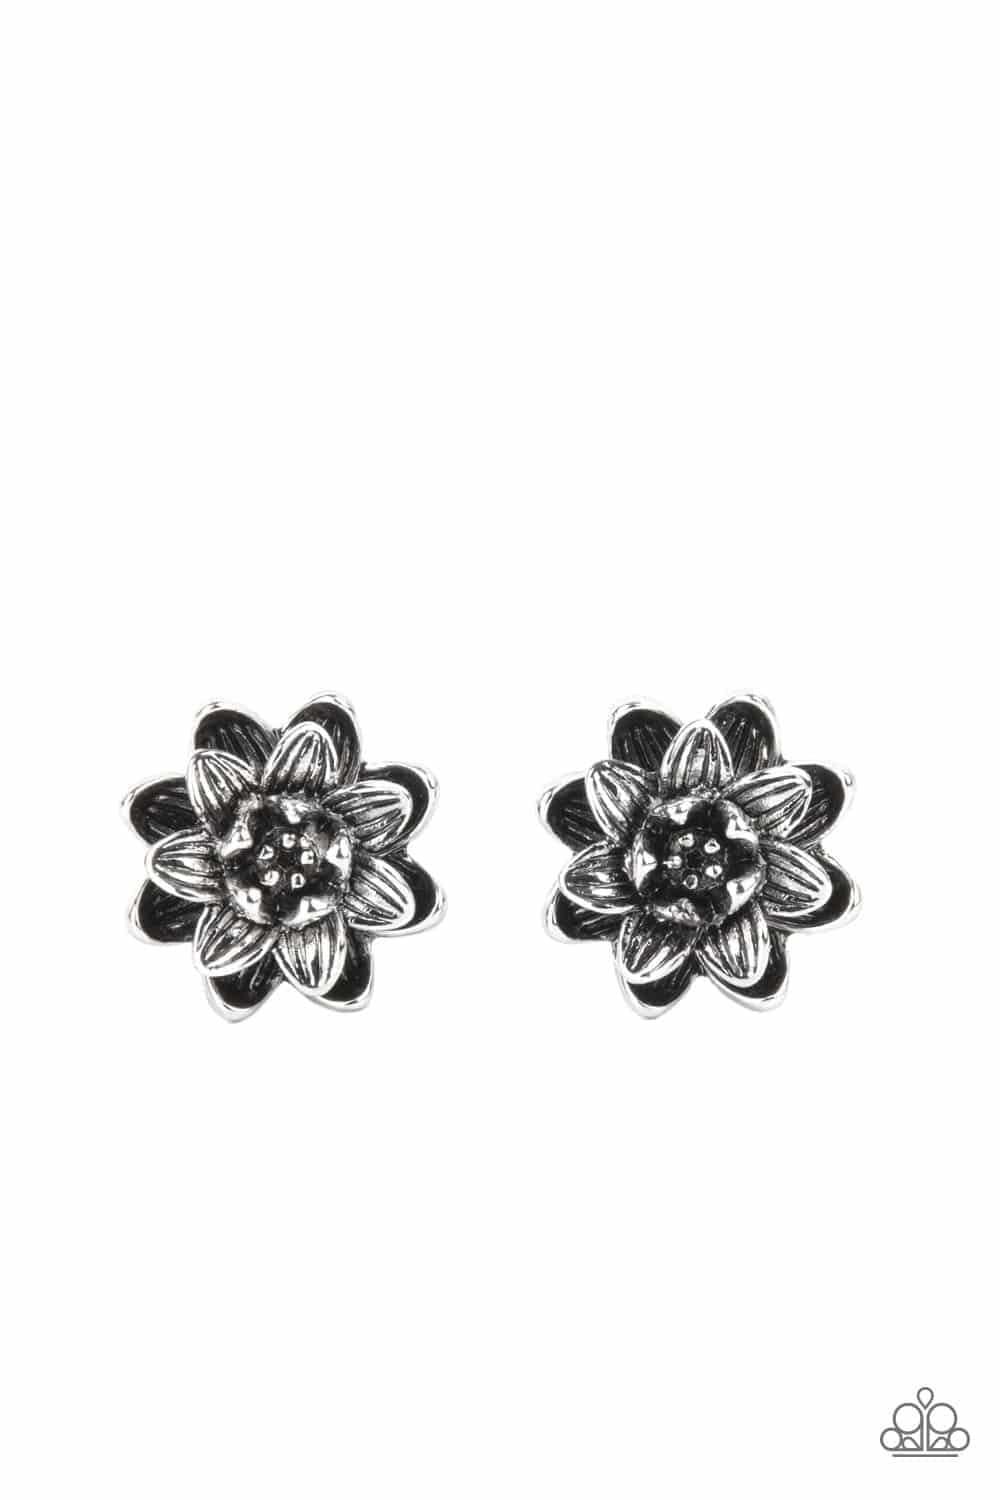 Paparazzi Accessories - Water Lily Love - Silver Post Earring - Bling by JessieK